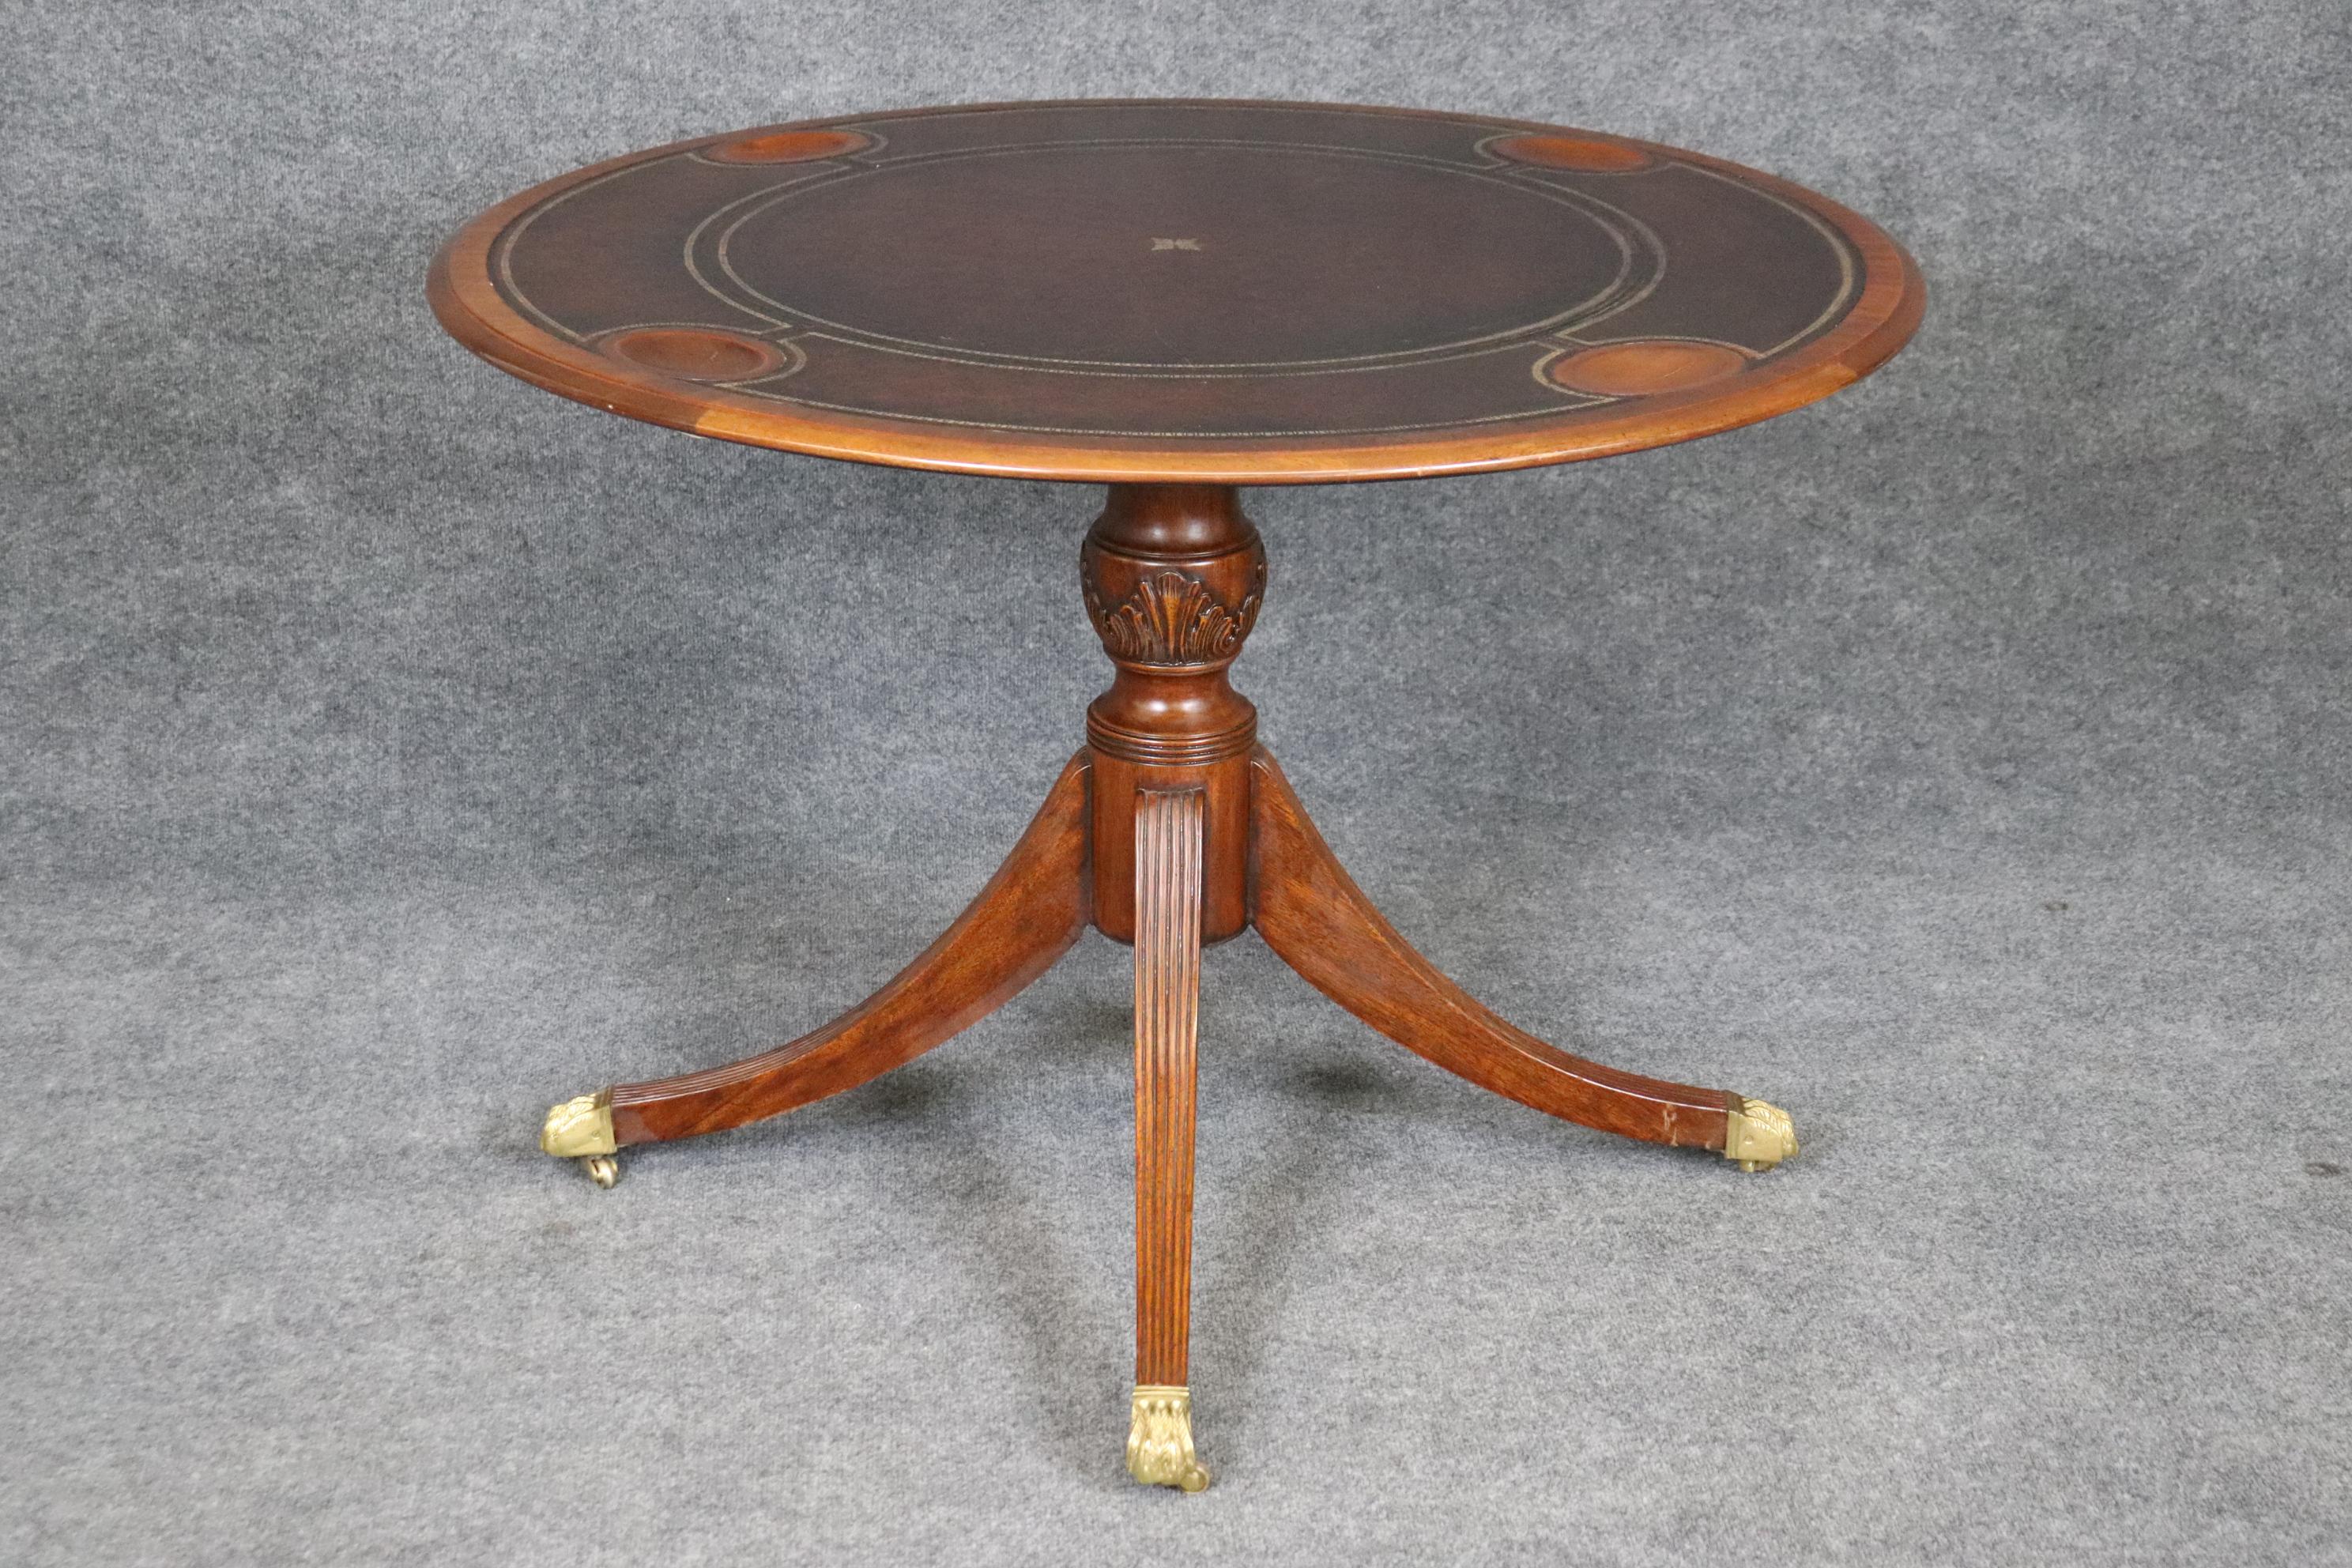 This is a gorgeous Maitland Smith tilt-top leather card or games table. The table features scooped areas for chips or cards and a beautiful leather top with burgundy and gold embossing. The table is in good condition and will have signs of use and